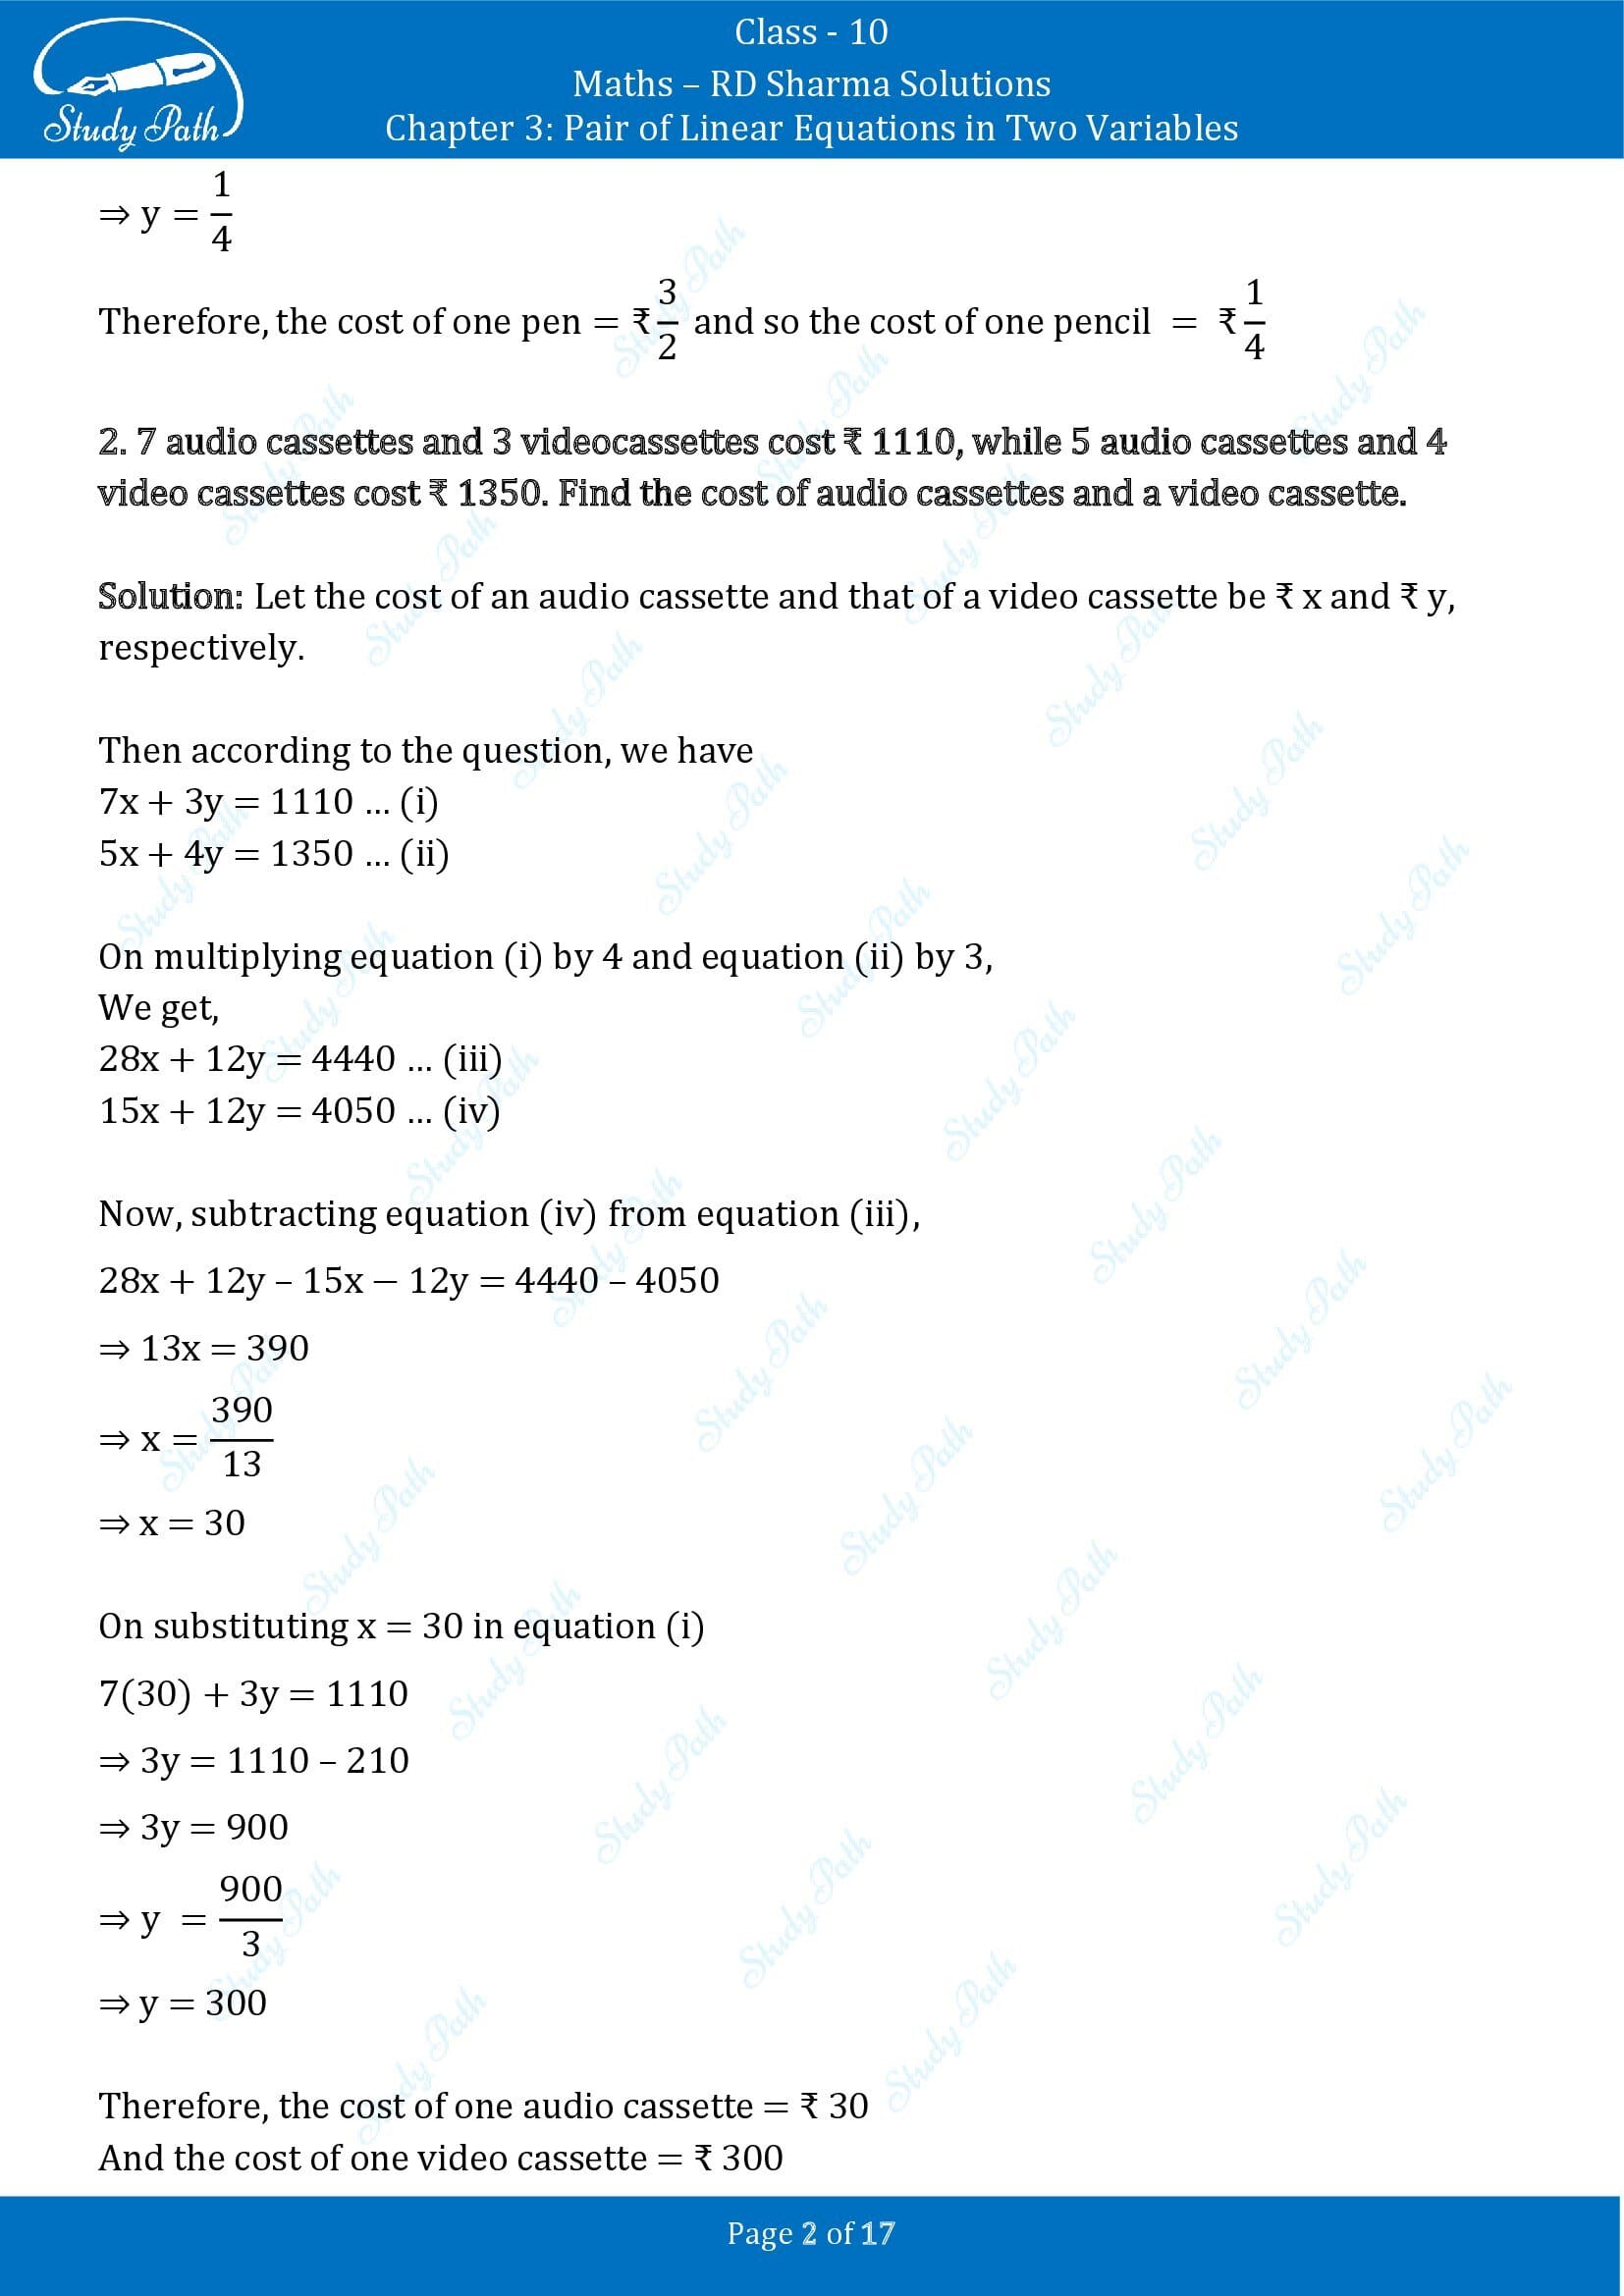 RD Sharma Solutions Class 10 Chapter 3 Pair of Linear Equations in Two Variables Exercise 3.6 00002